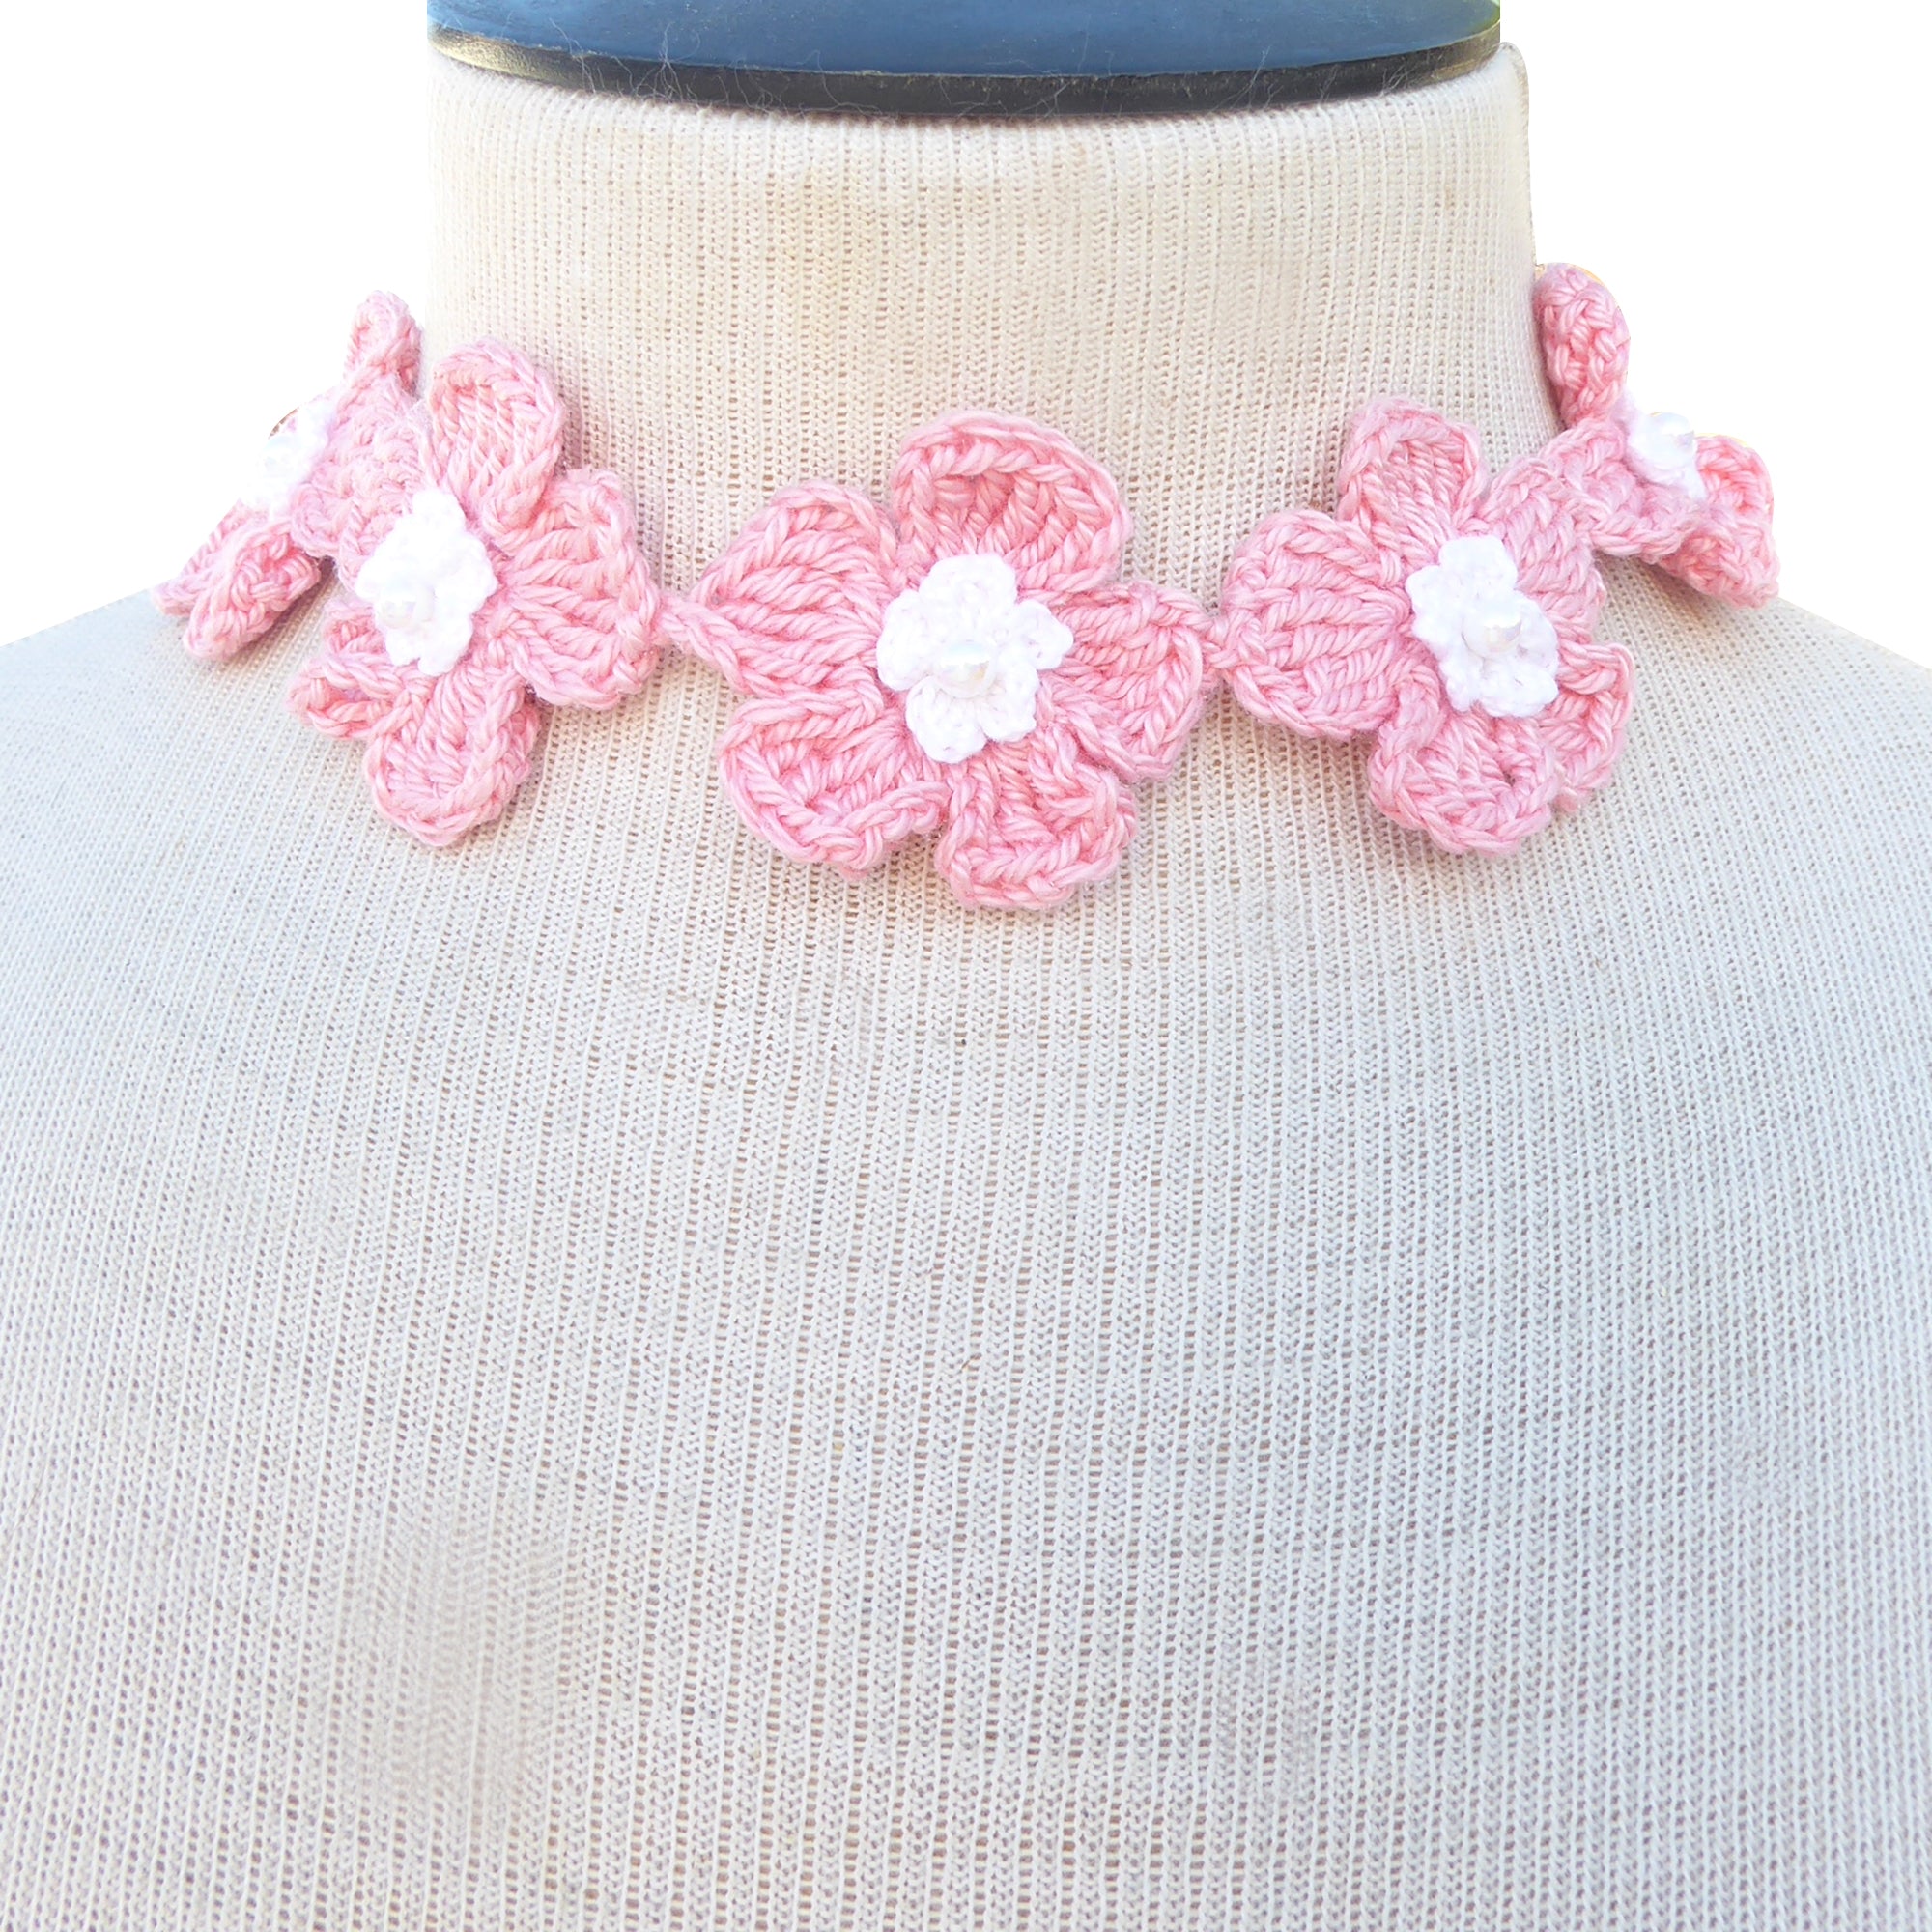 Pink and white pearl daisy earrings and necklace by Jenny Dayco 9